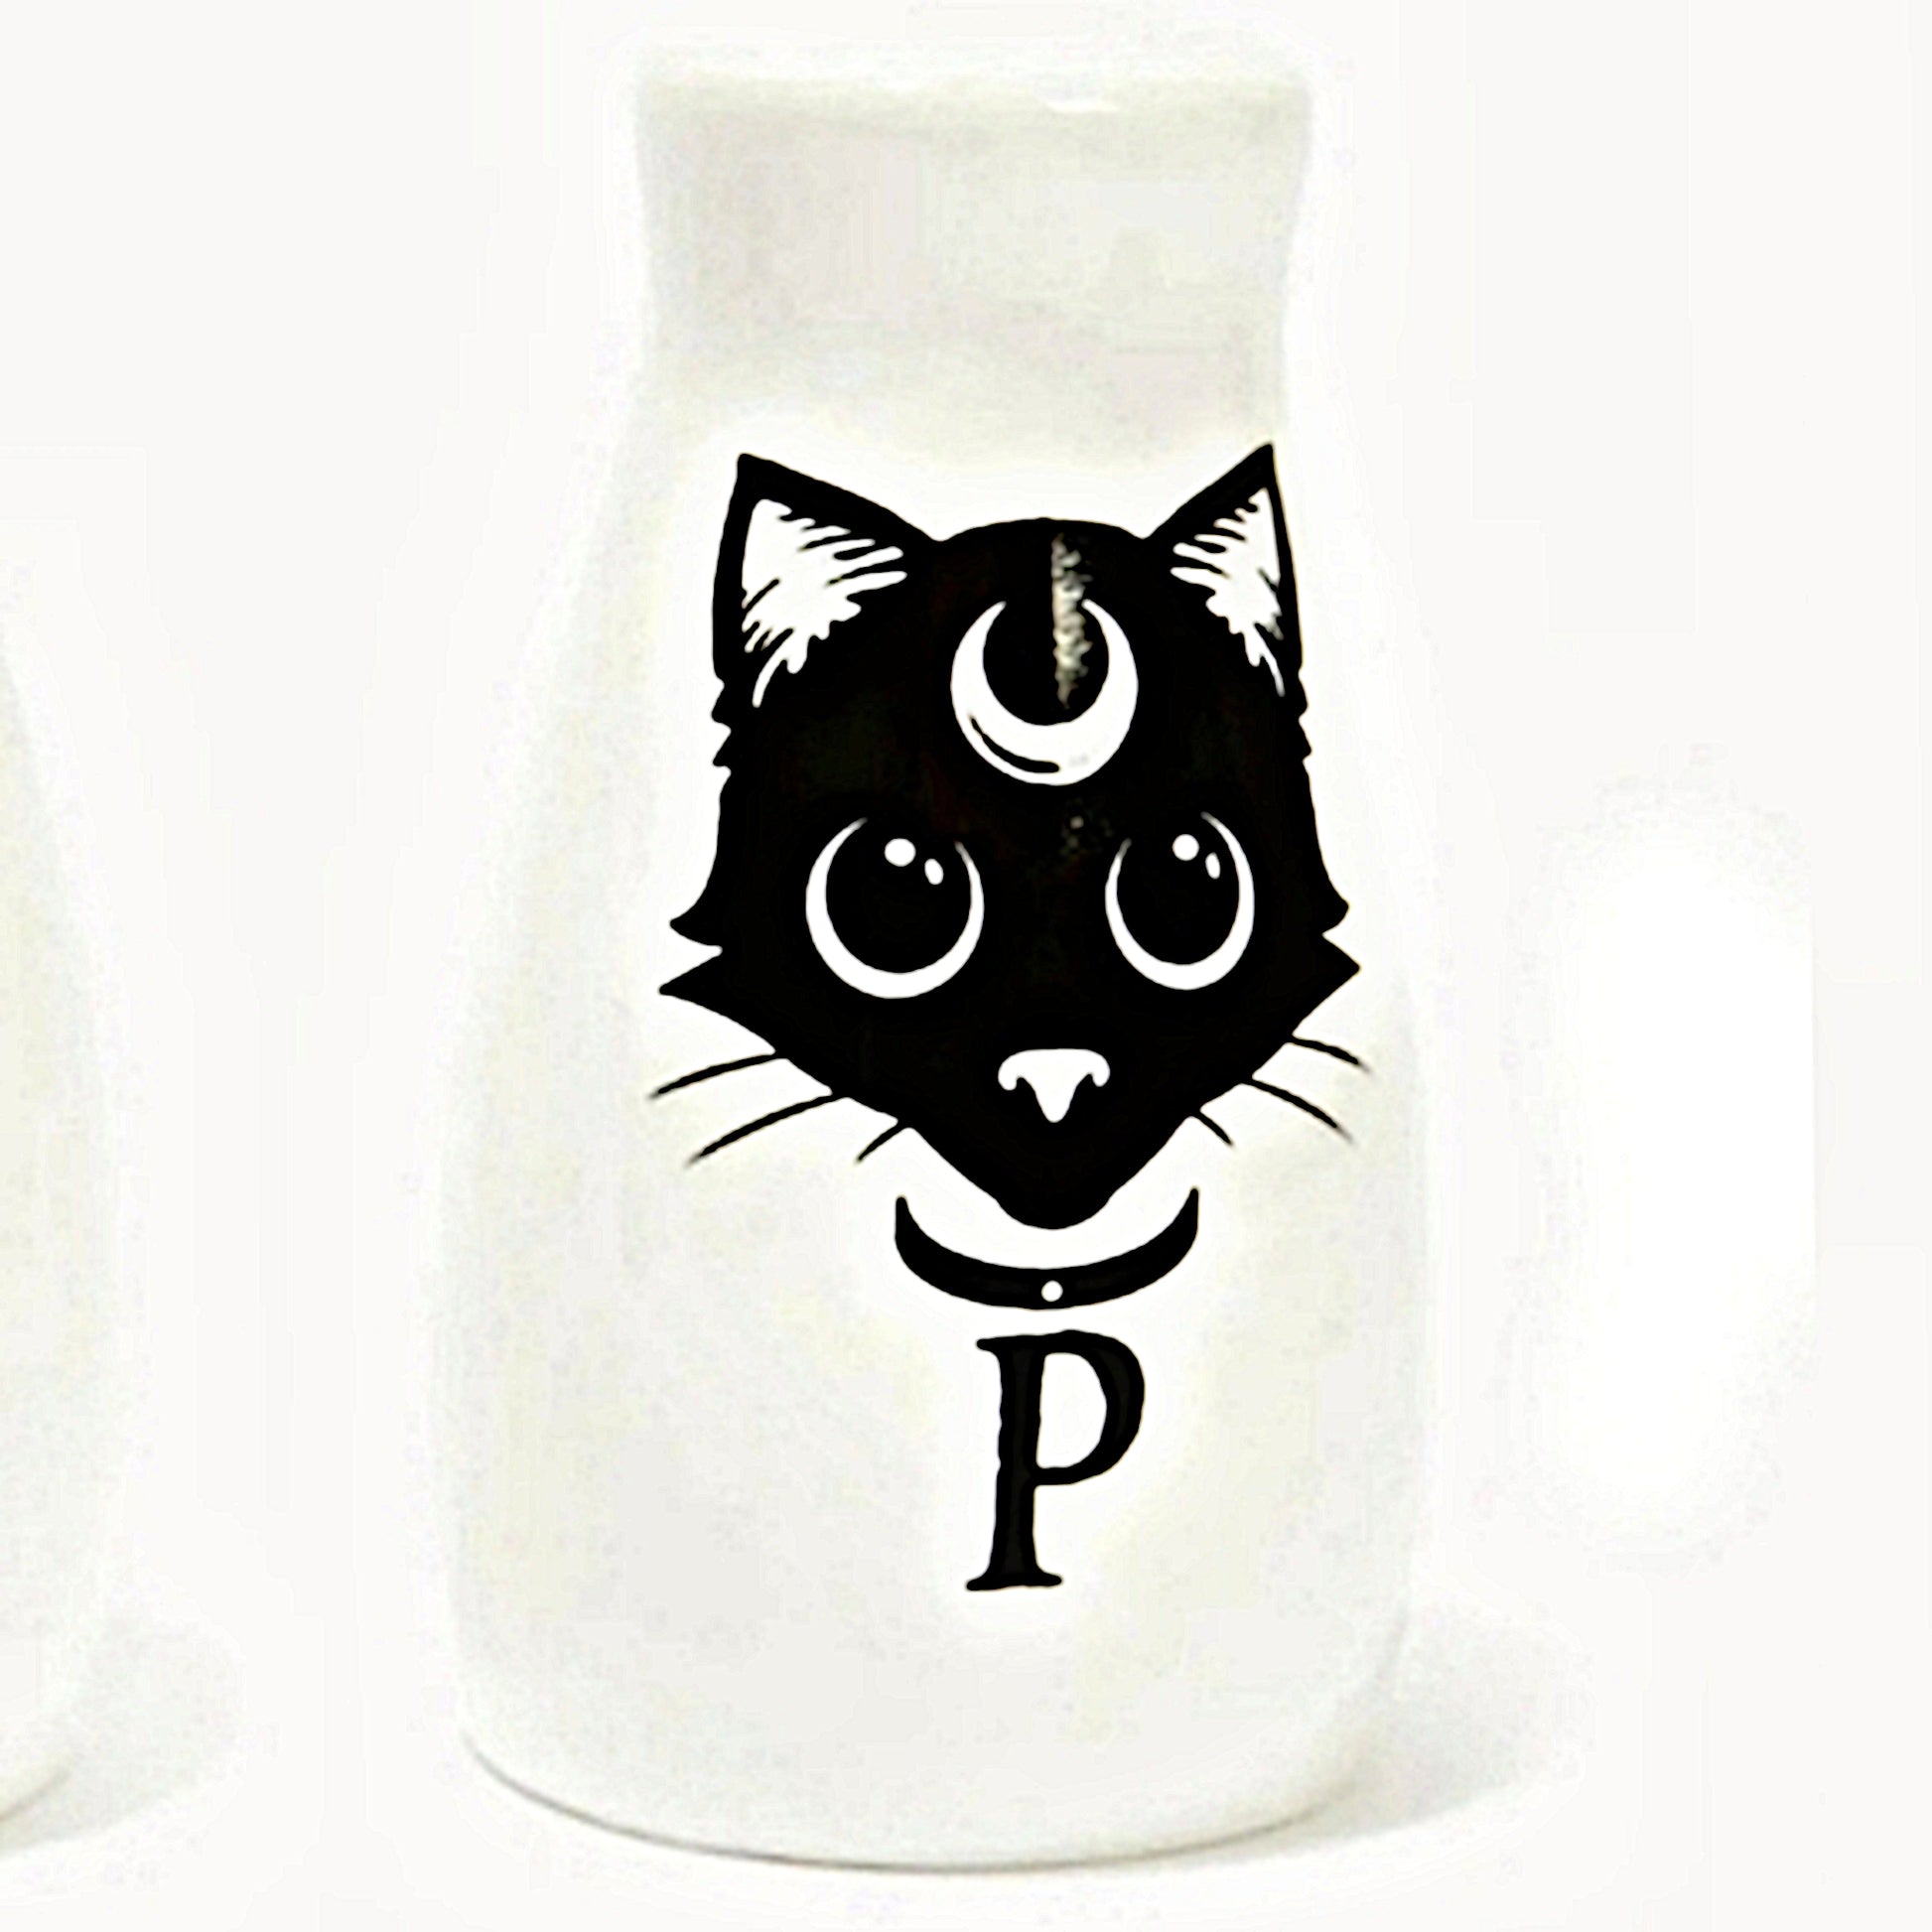 Salt & Pepper Shakers Set | Ceramic Gothic Cats Moon and Star - Alchemy Gothic - Cooking Utensils